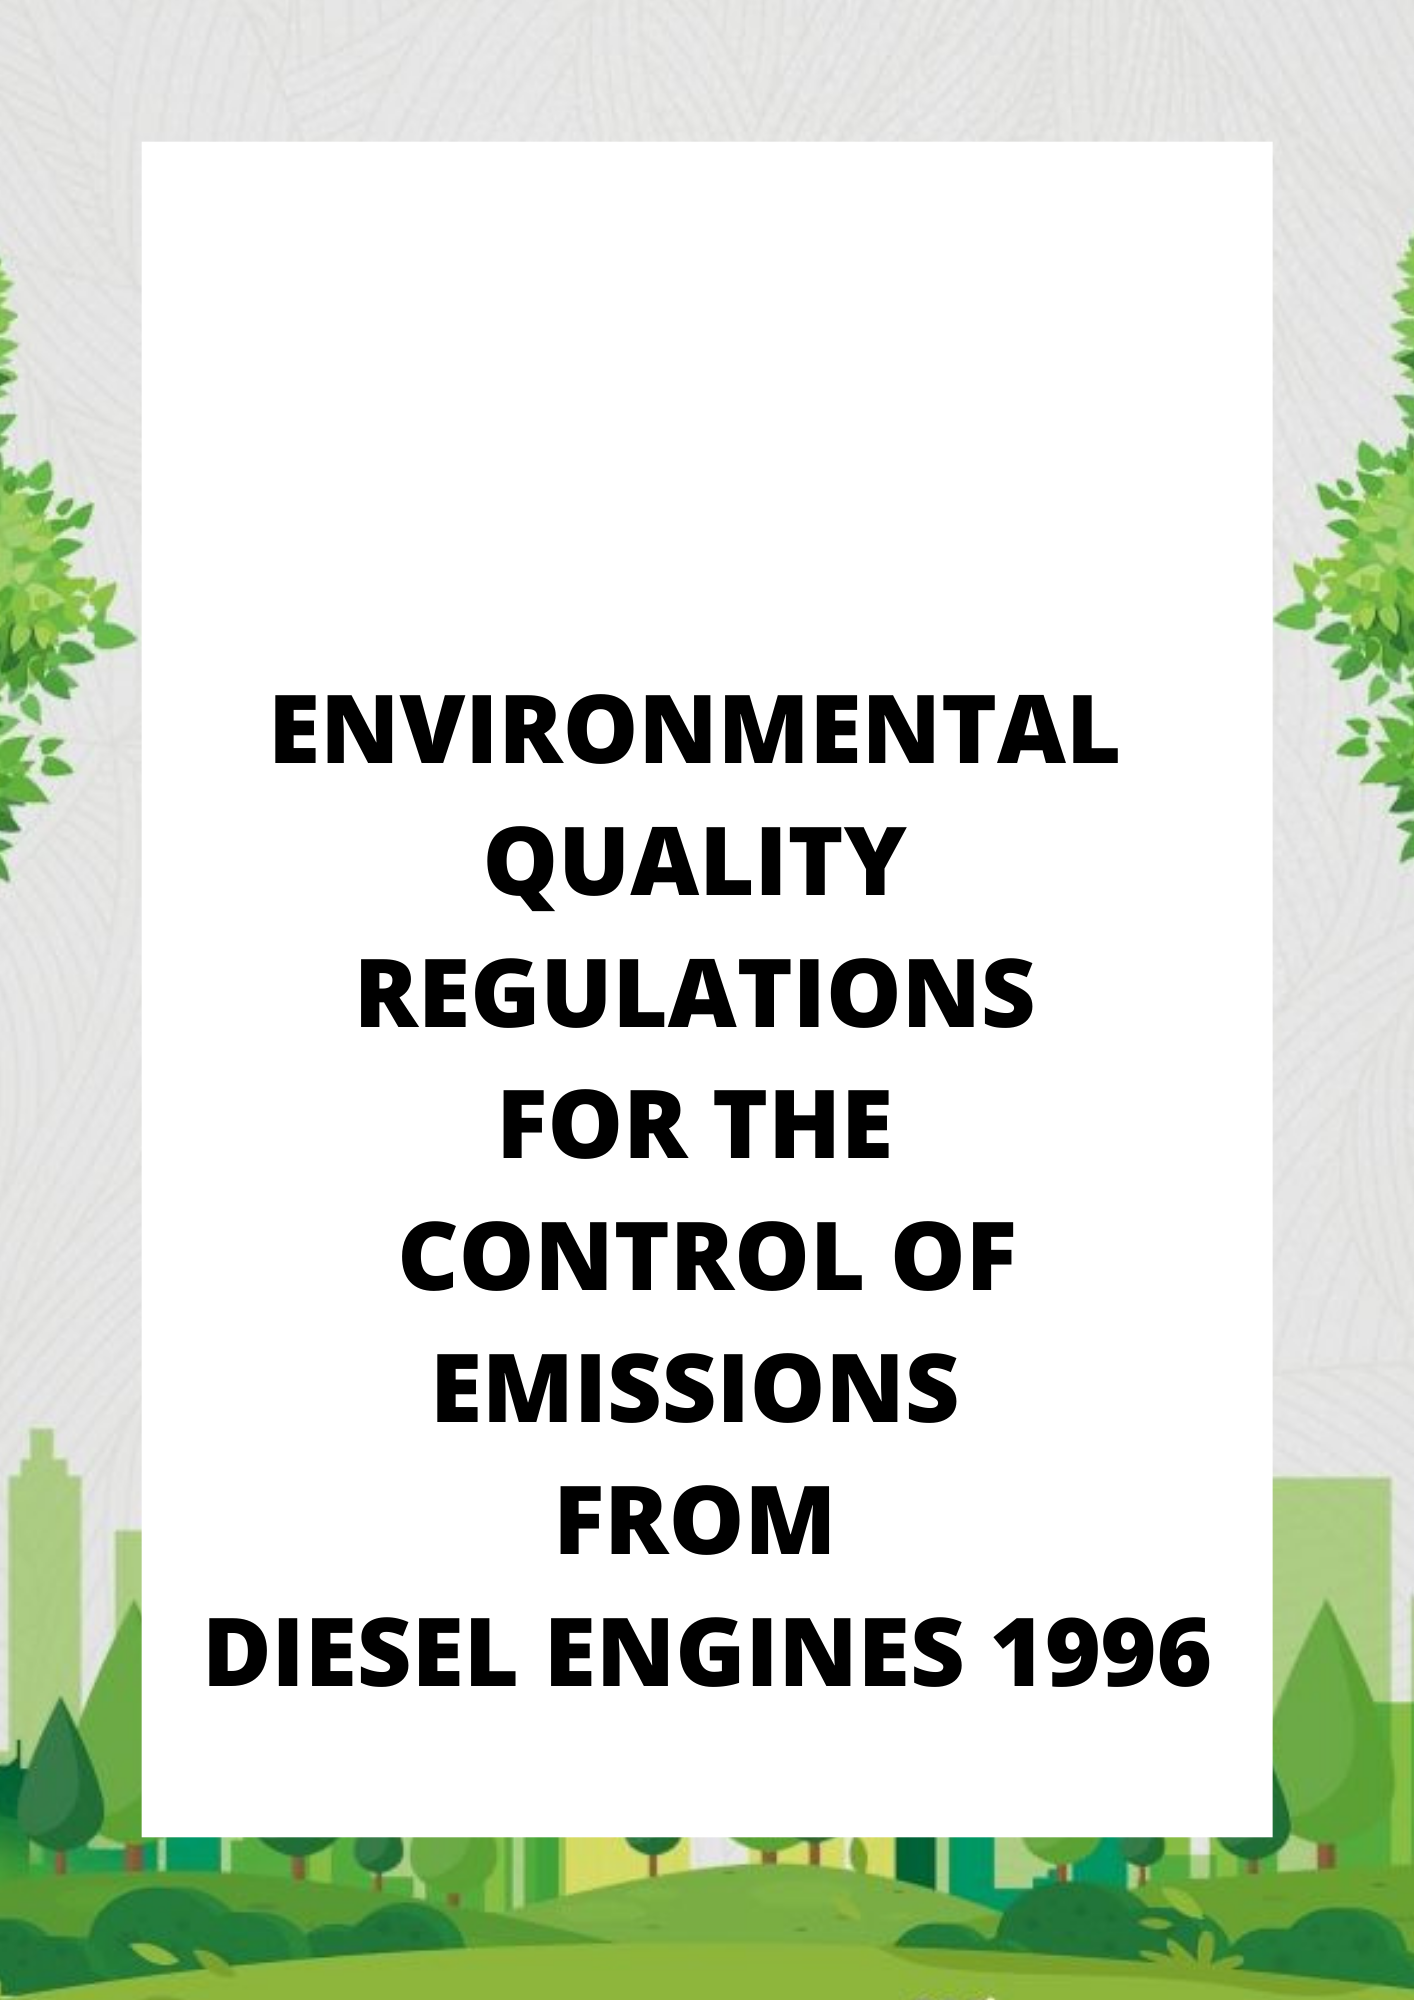 Environmental Quality Regulations for the Control of Emissions from Diesel Engines 1996